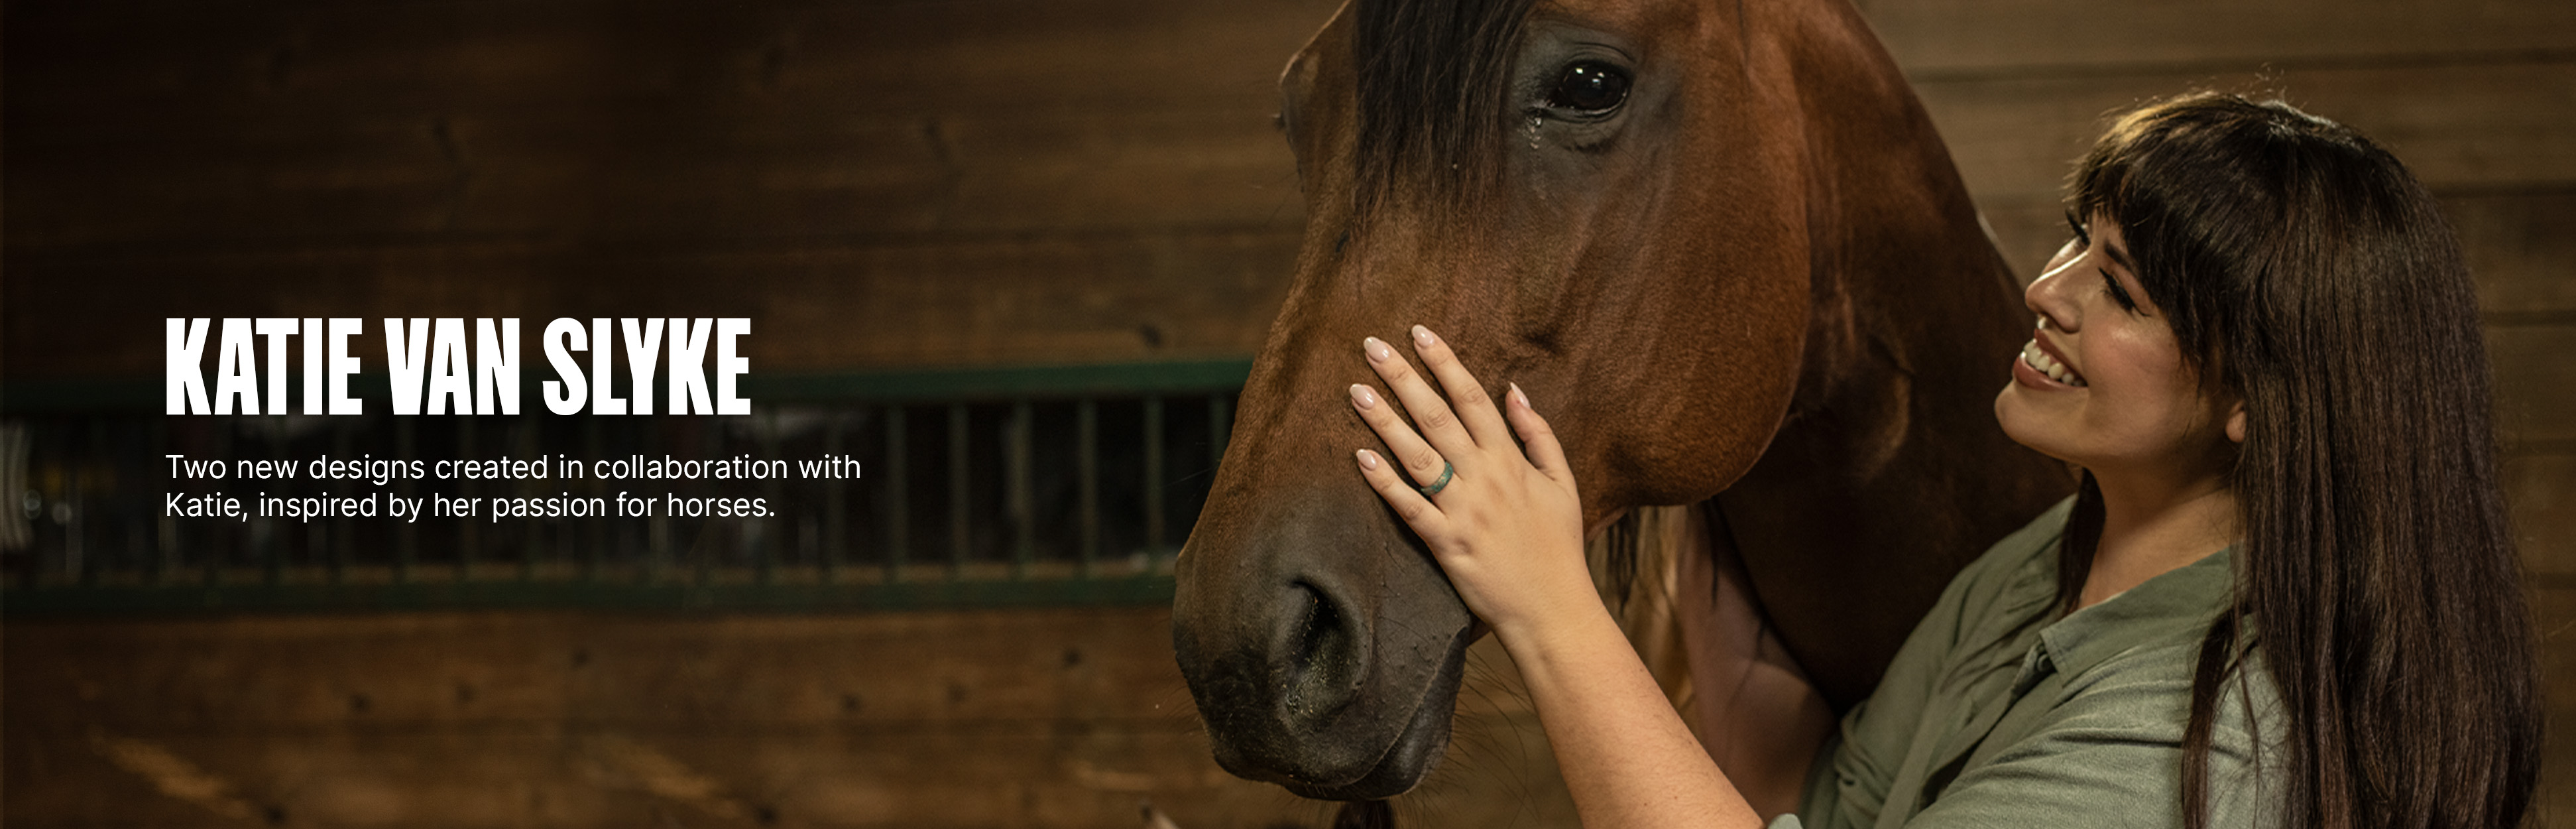 Groove Life collabs with Katie Van Slyke (Katie petting a horse wearing a Groove Life ring) 